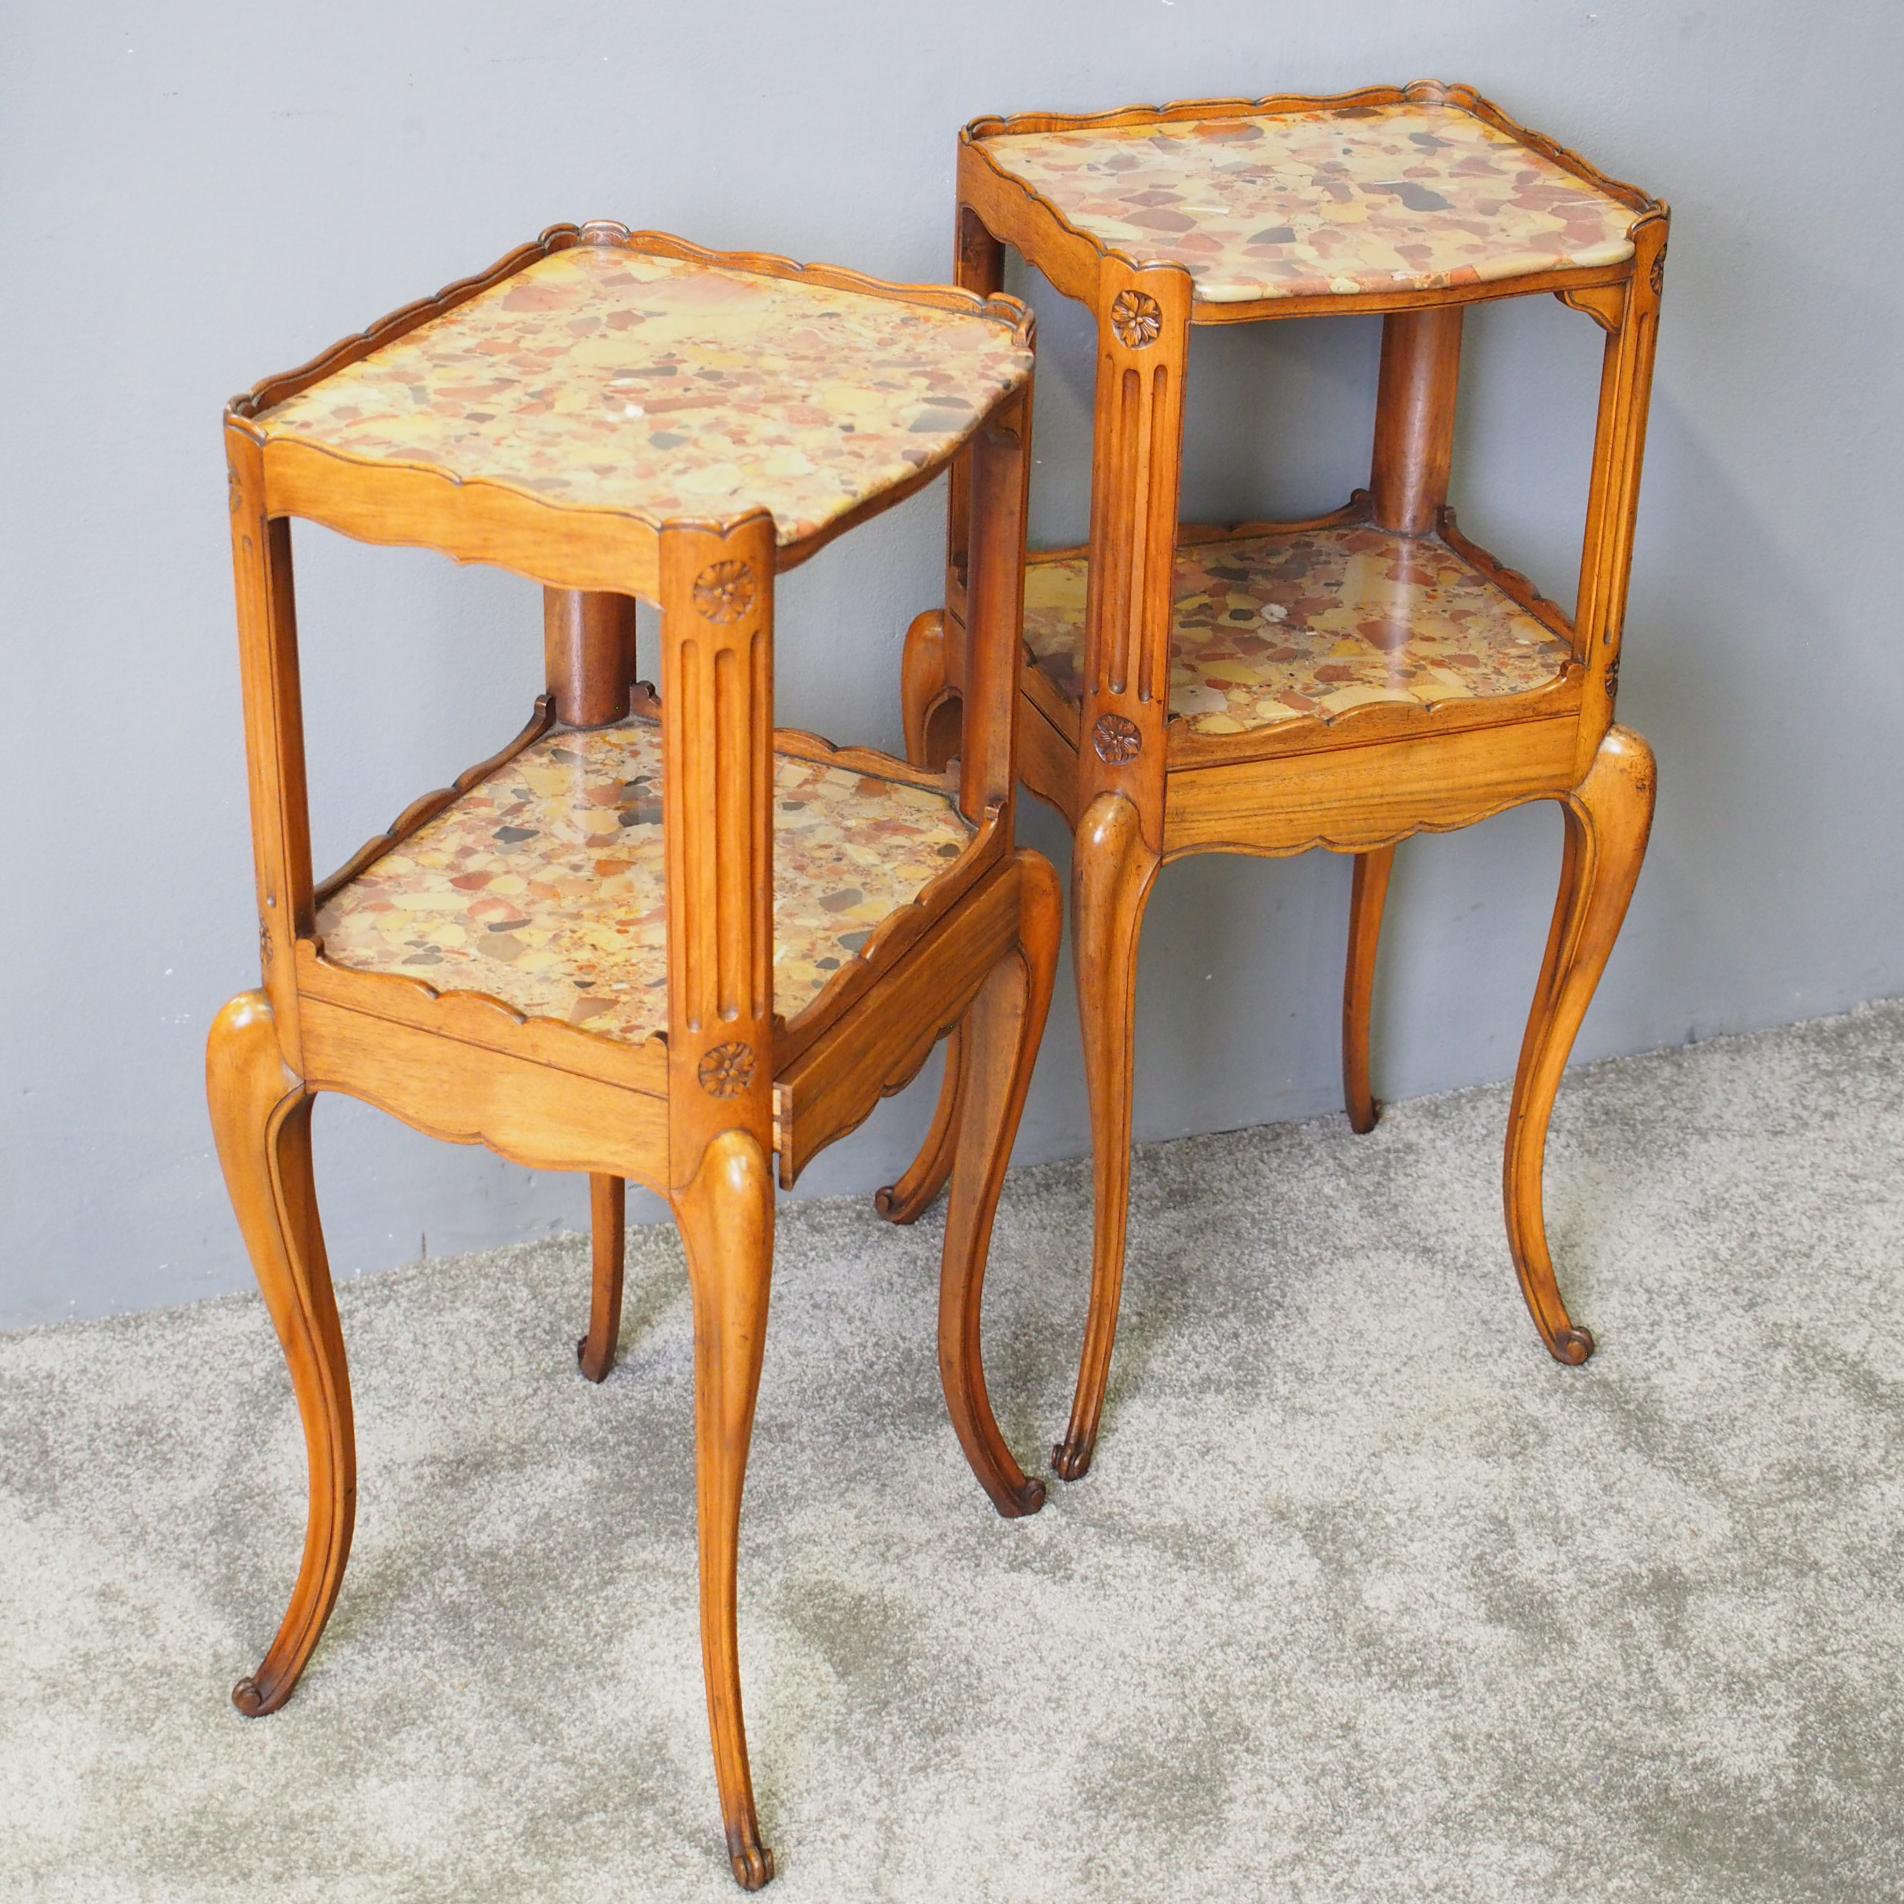 Pair of walnut two-tier bedside tables or étagères by Morison and Co of Edinburgh, circa 1890. With shaped three quarter gallery around a top of mottled pink marble, and a similar marble tier below this. These are connected by beaded uprights with